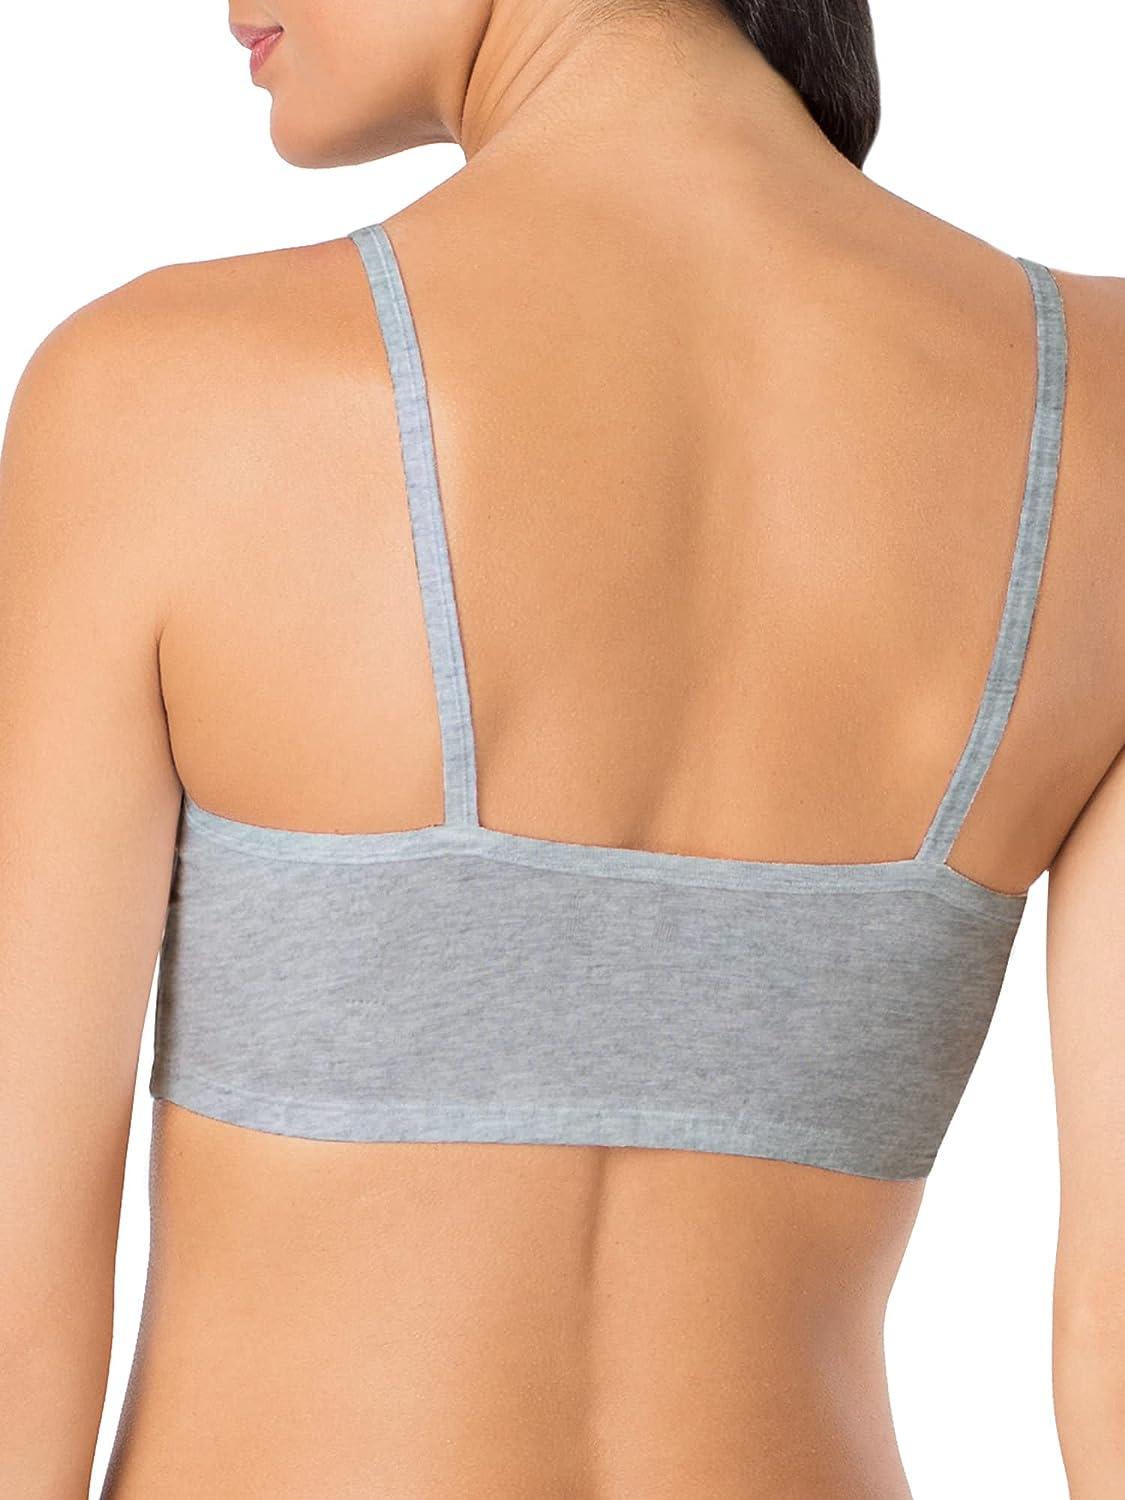 Fruit of The Loom Women's Spaghetti Strap Cotton Pull Over 3 Pack Sports Bra,  Charcoal Heather/White/Isazure, 32 price in UAE,  UAE